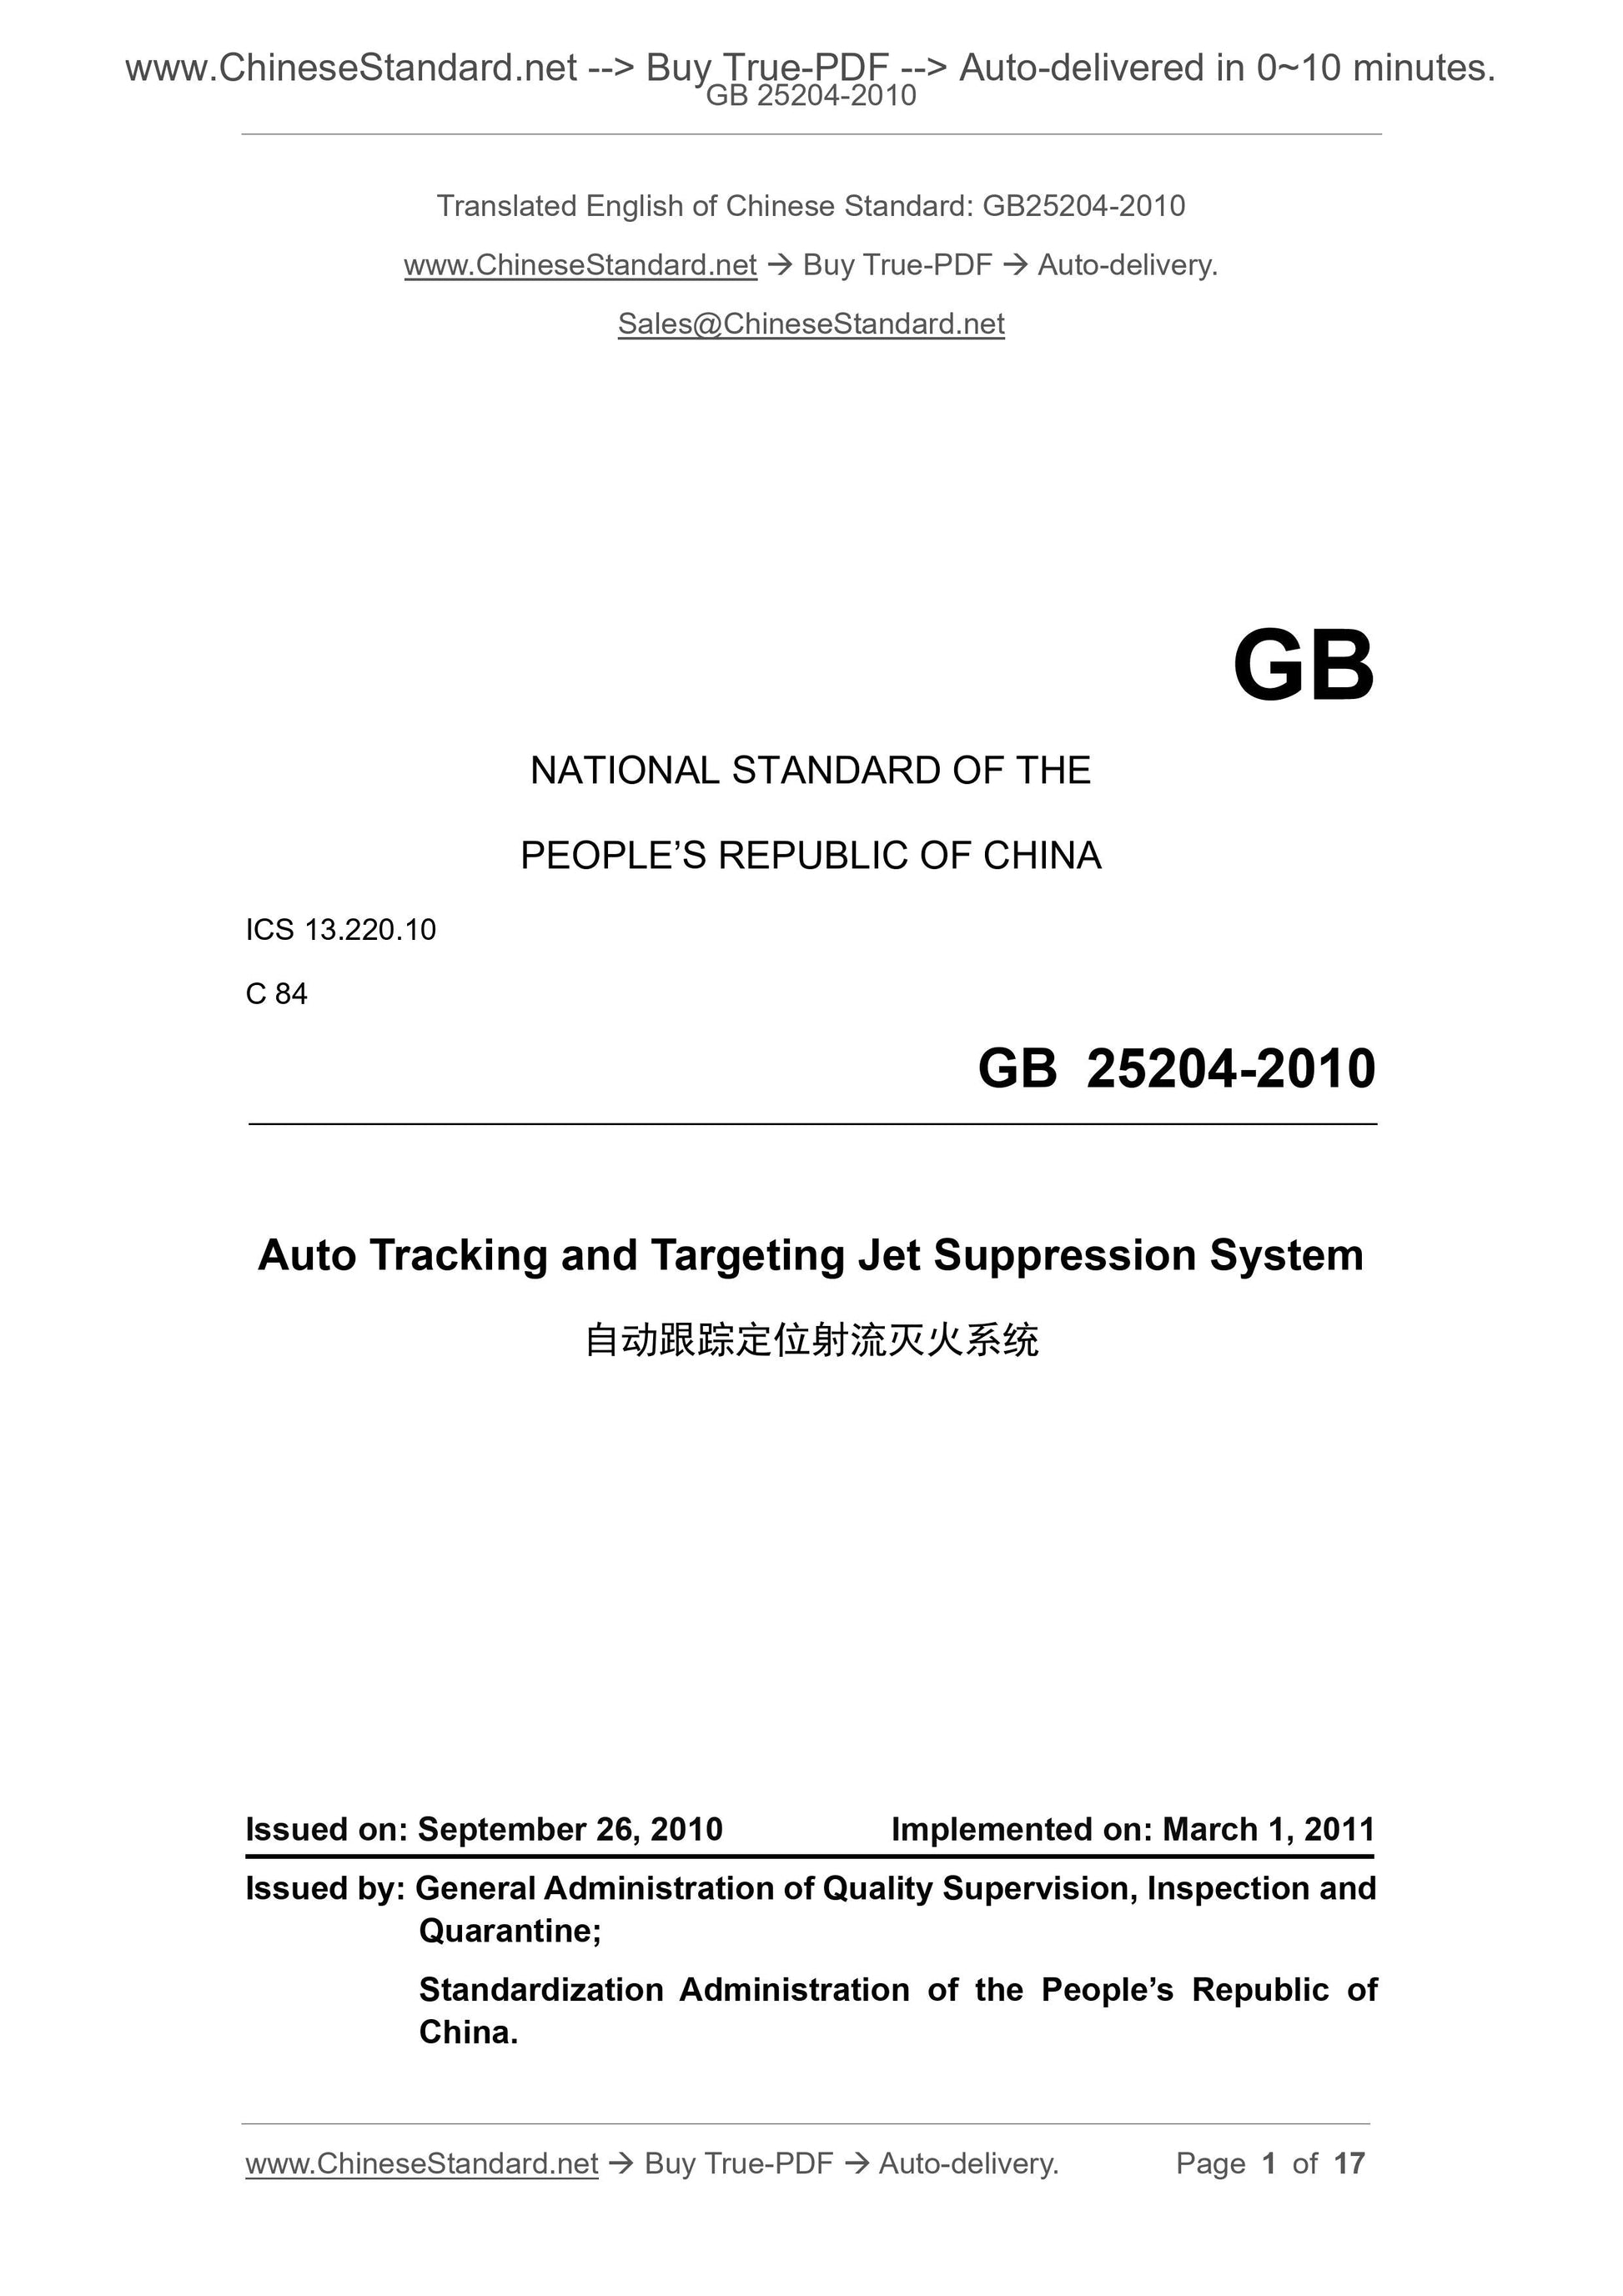 GB 25204-2010 Page 1